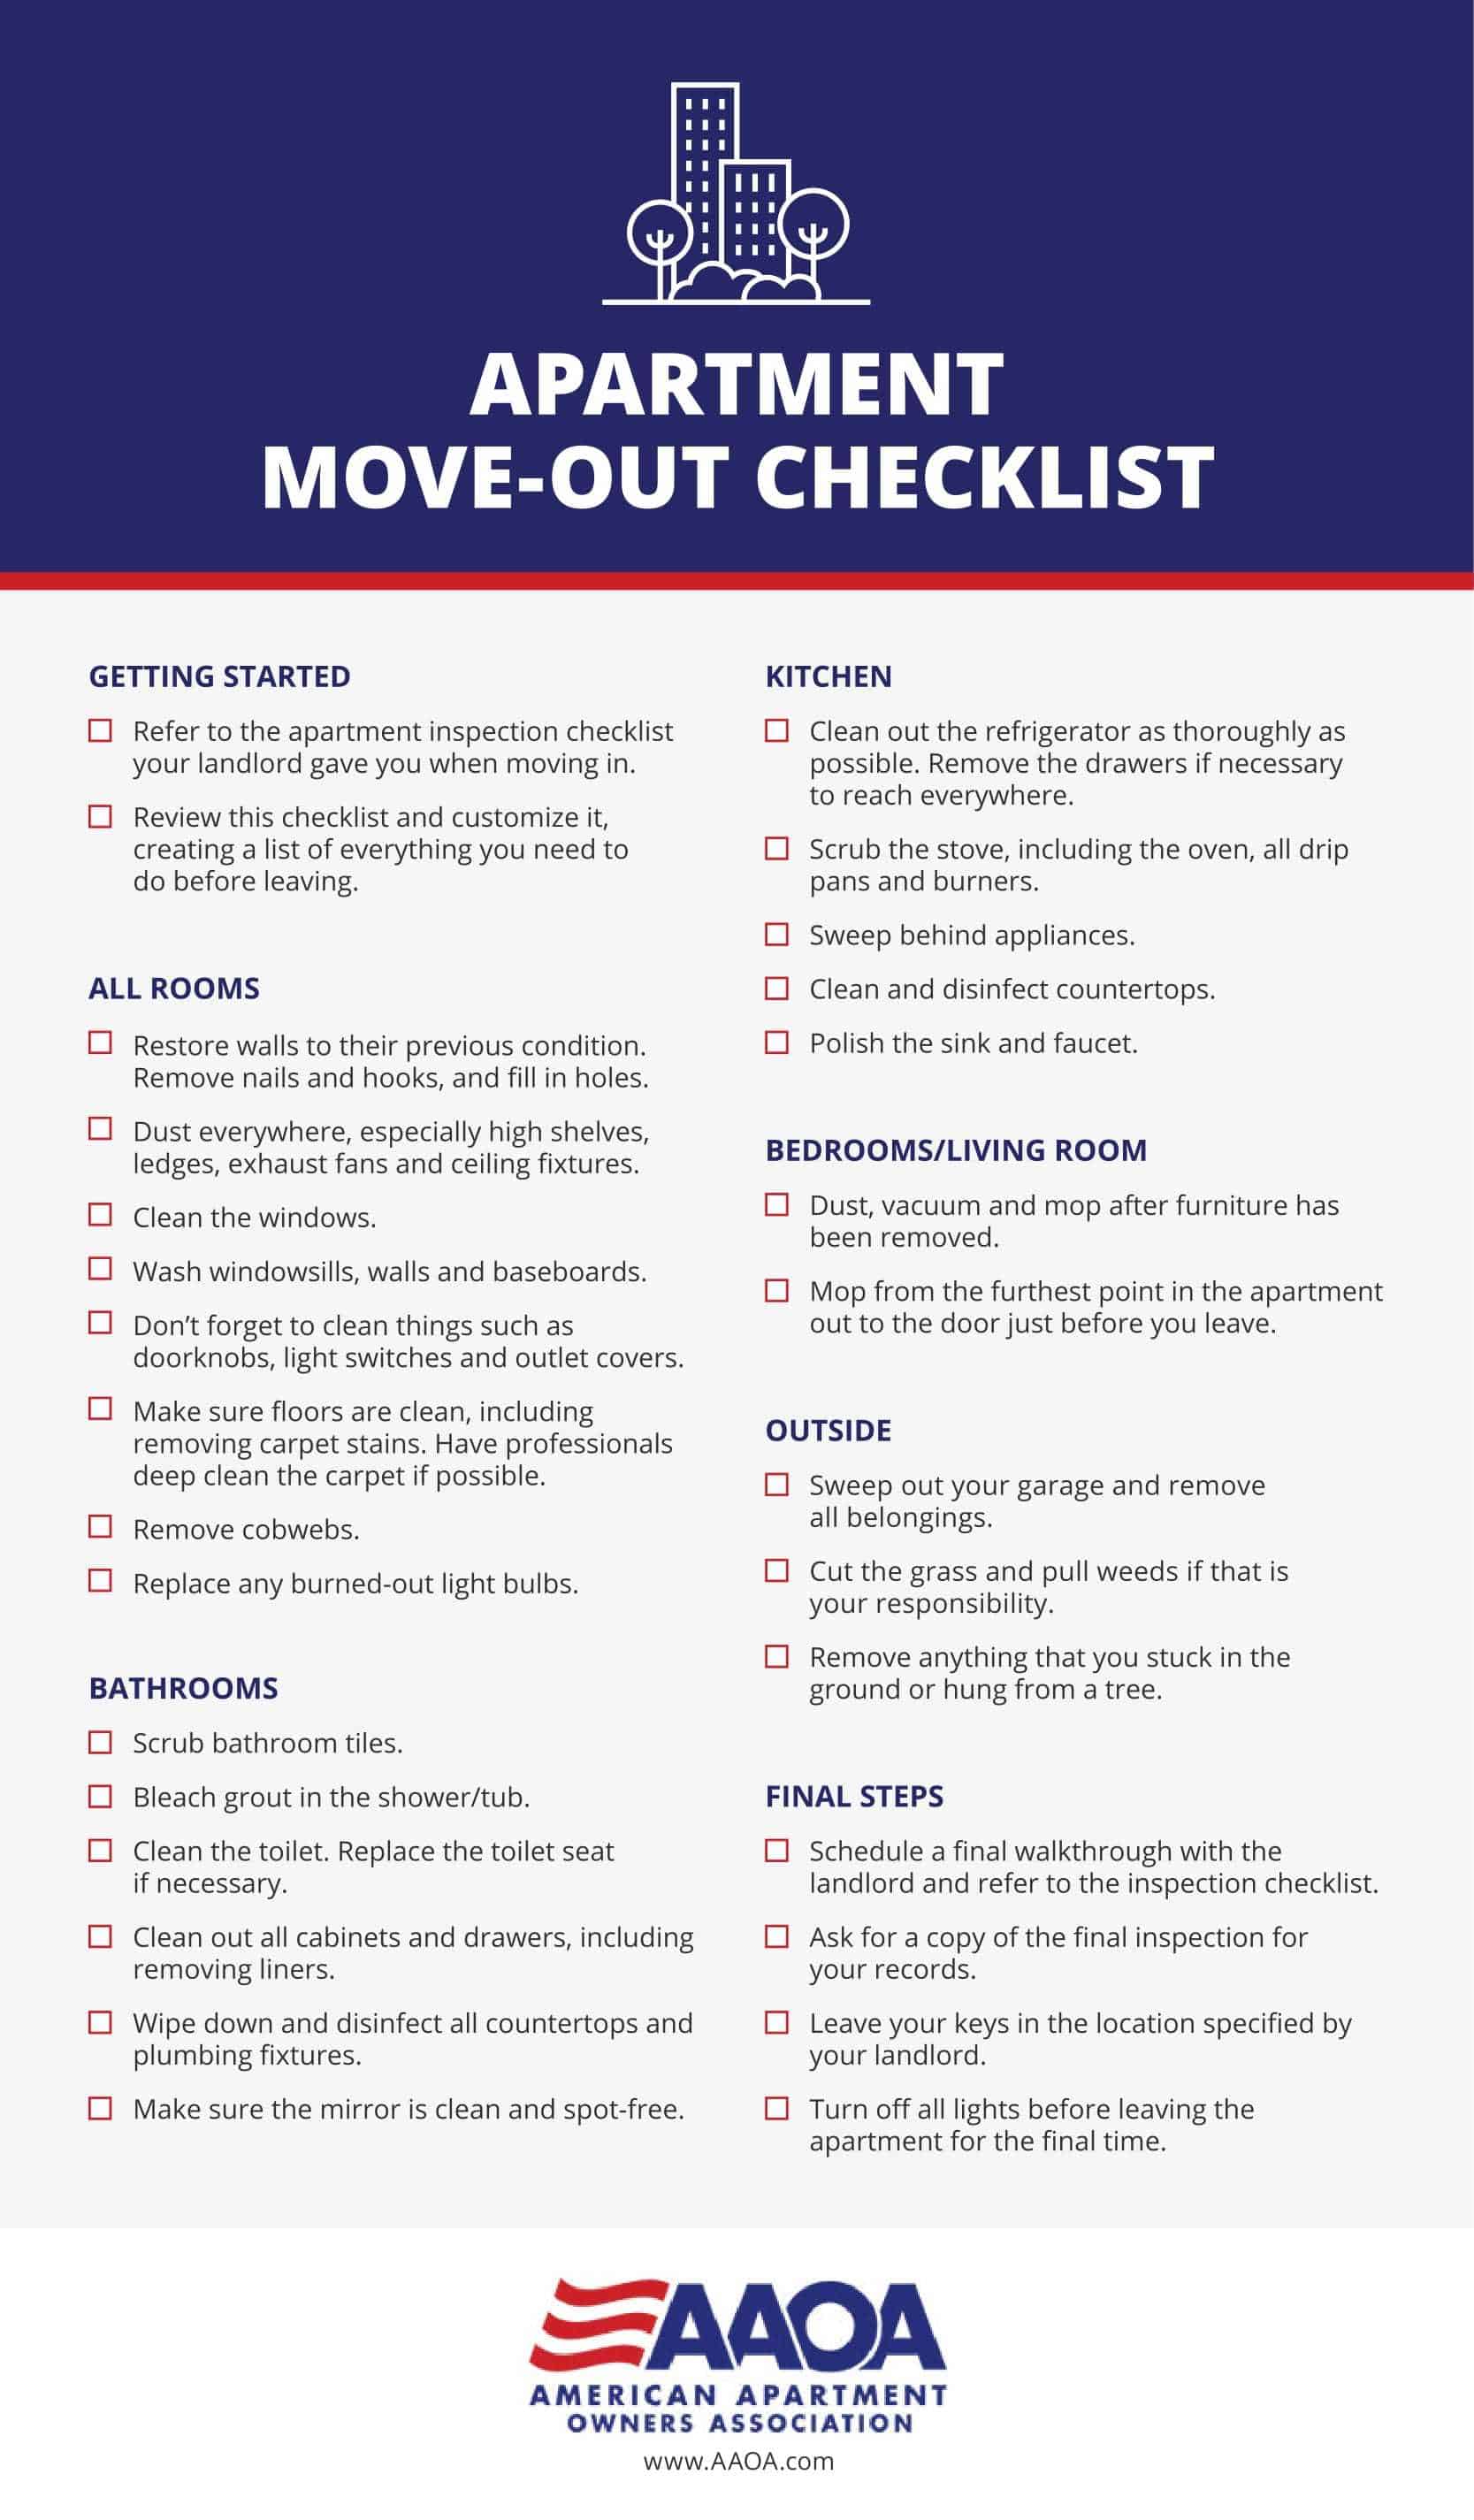 https://www.american-apartment-owners-association.org/wp-content/uploads/2017/02/moving-checklist.jpg